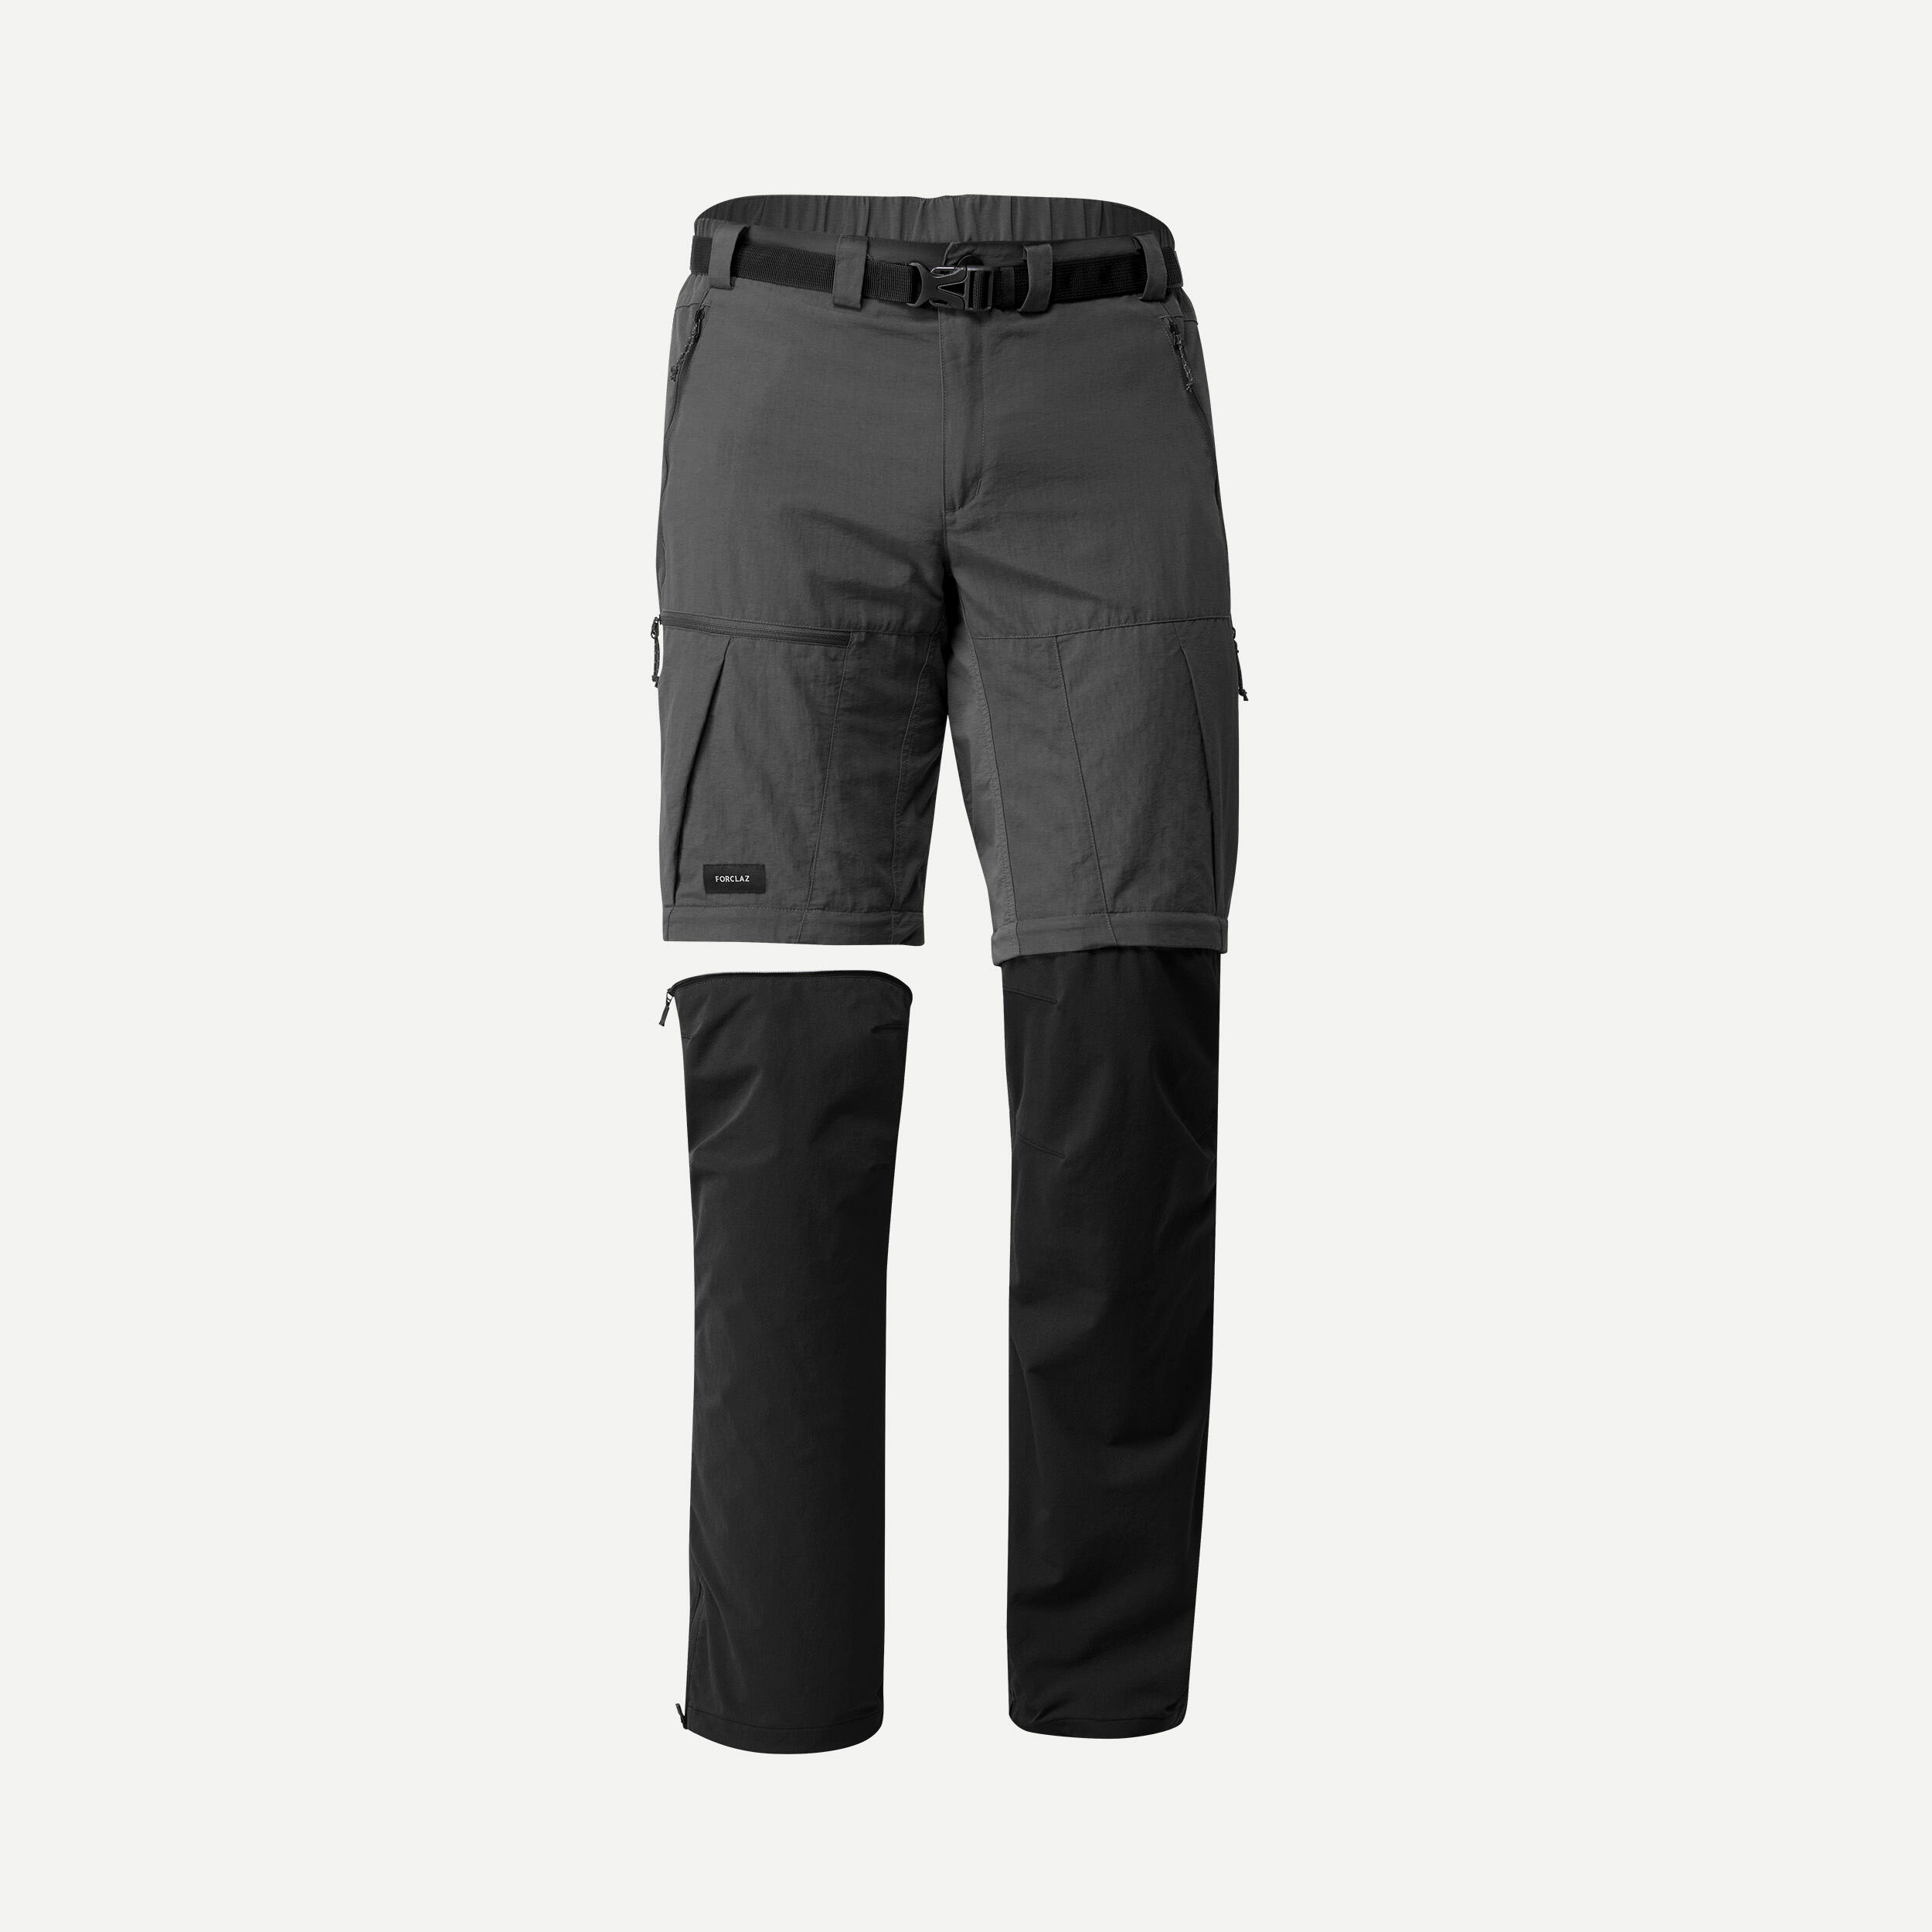 Buy Fishing Trouser, Rain Protection Over Durable Waterproof Trousers,  Breathable Keep You Dry for Hiking, Walking, Fishing Adults Outdoor Trousers  Outdoor Cycling(Black) at Amazon.in